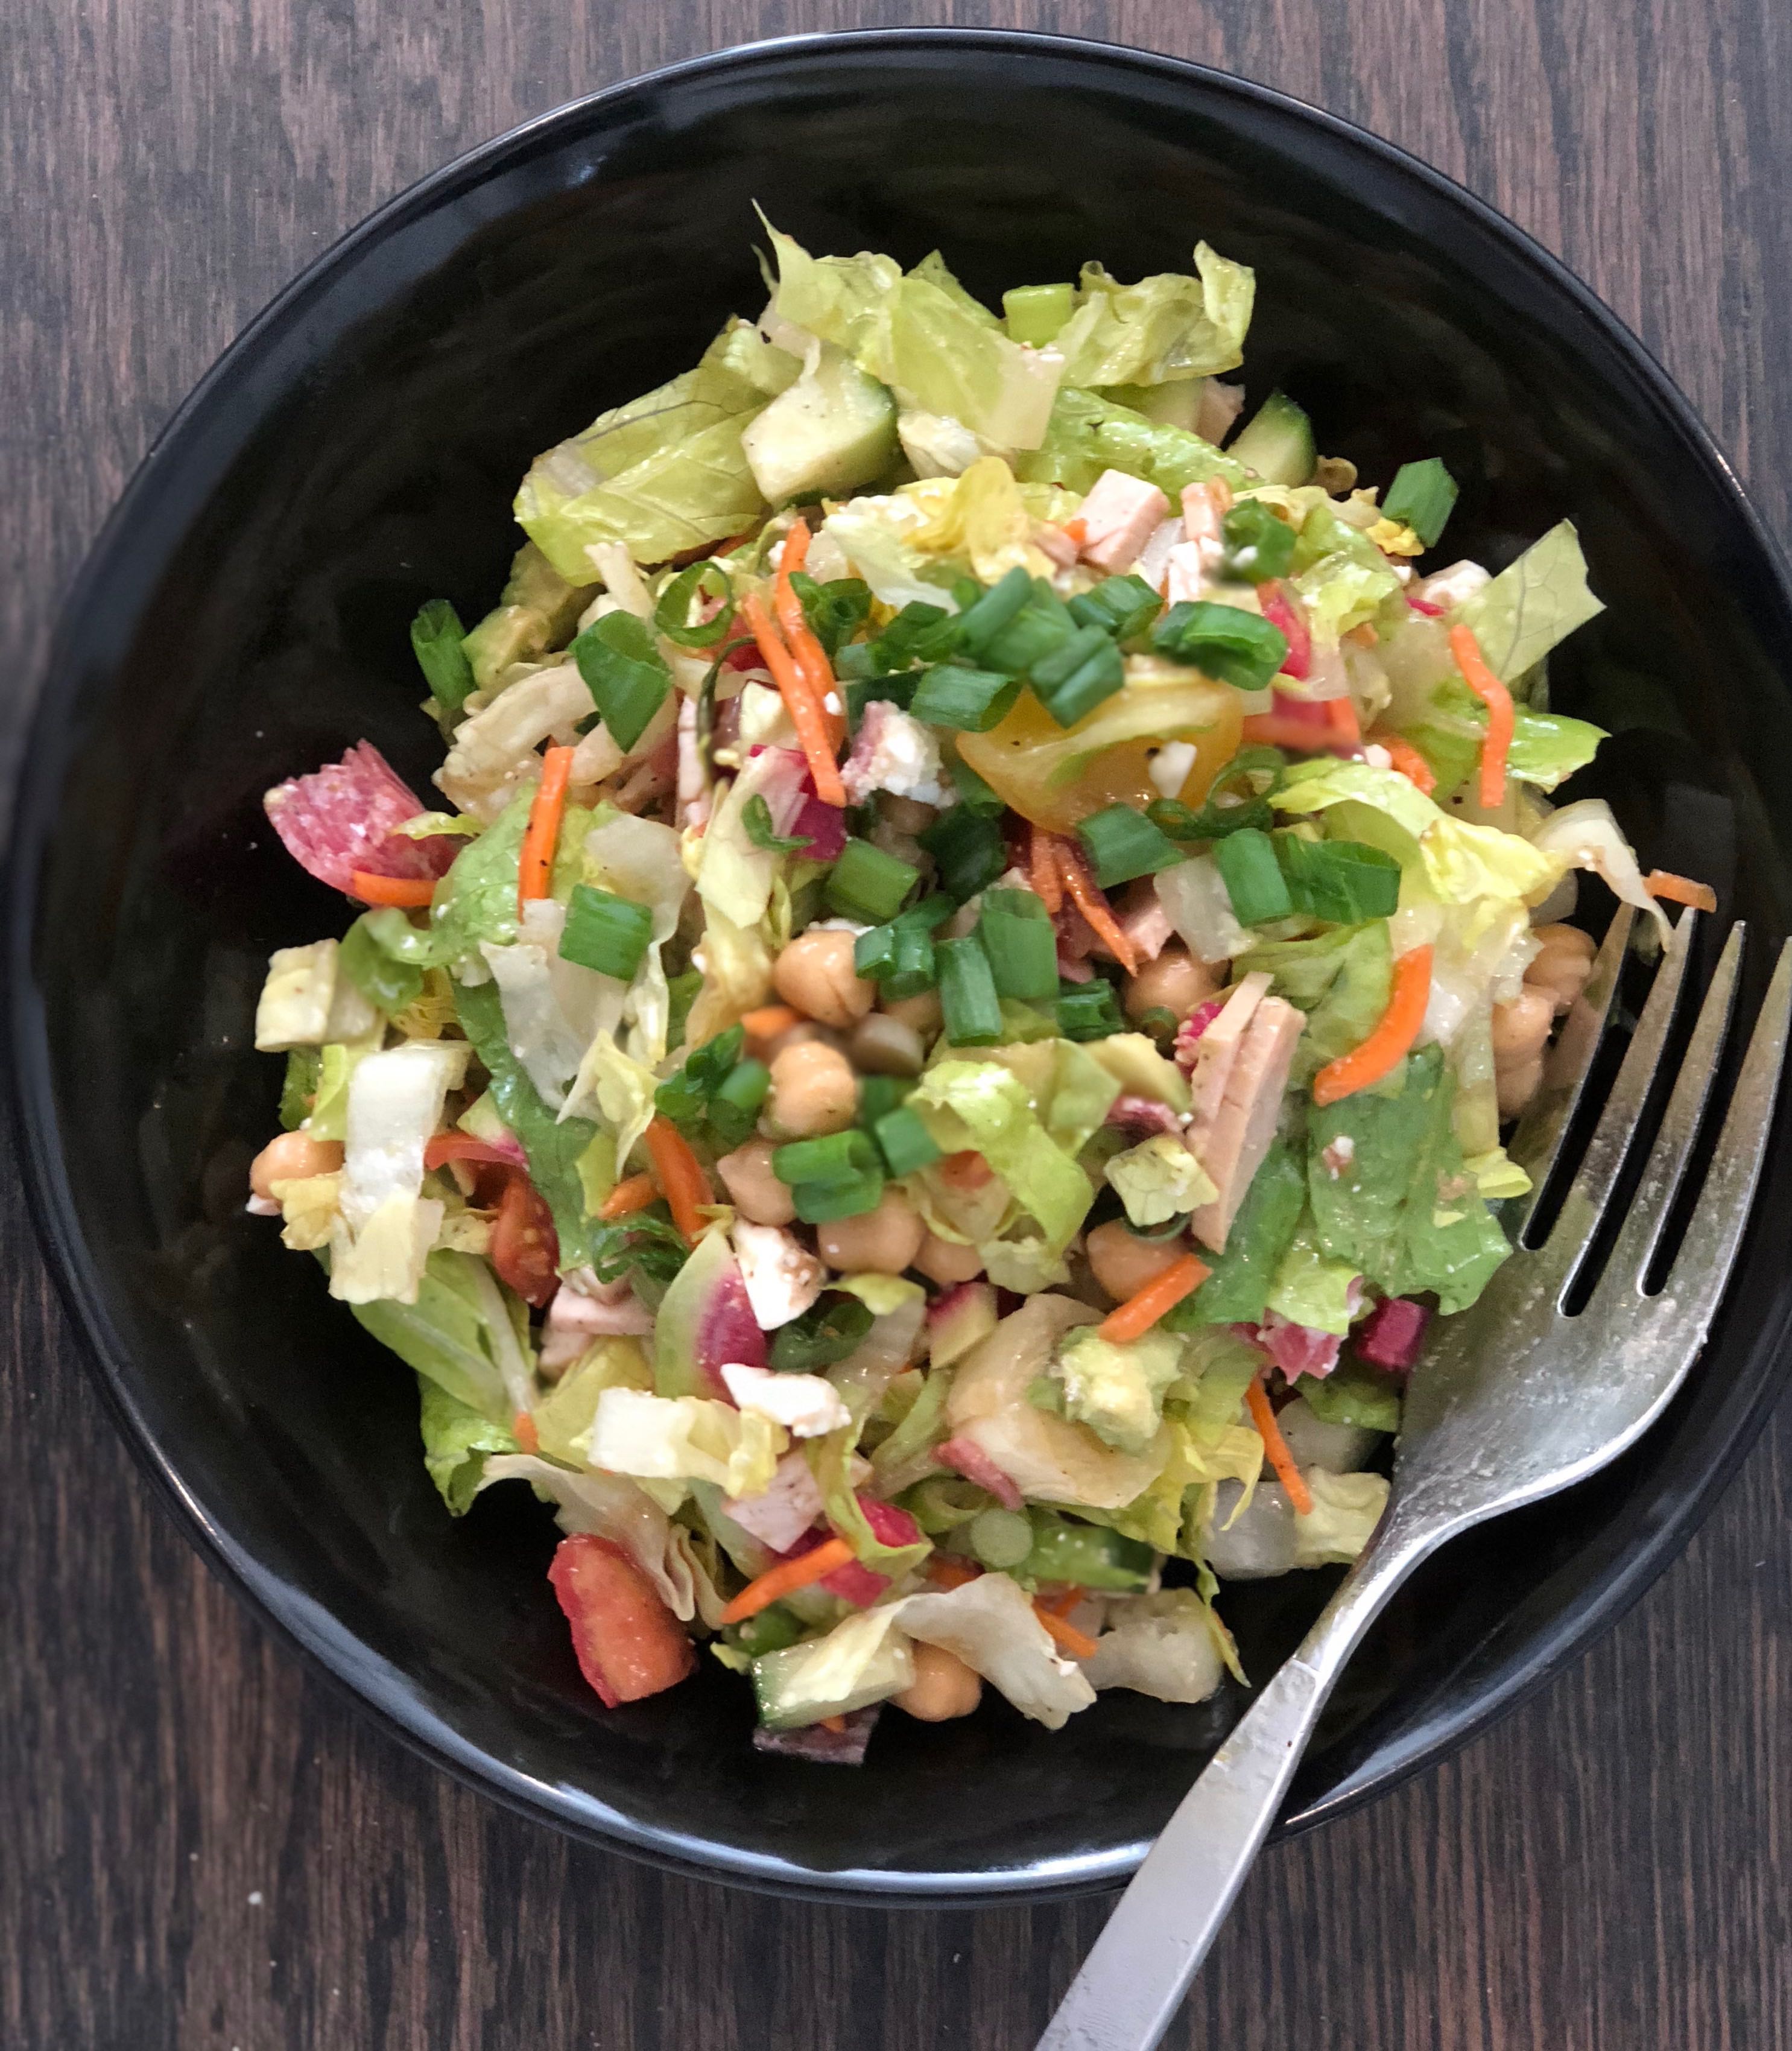 This savory Italian chopped salad recipe comes together in 10 minutes. It can be made Paleo, keto, vegetarian or Whole30 compliant by varying the ingredients. | grownupdish.com